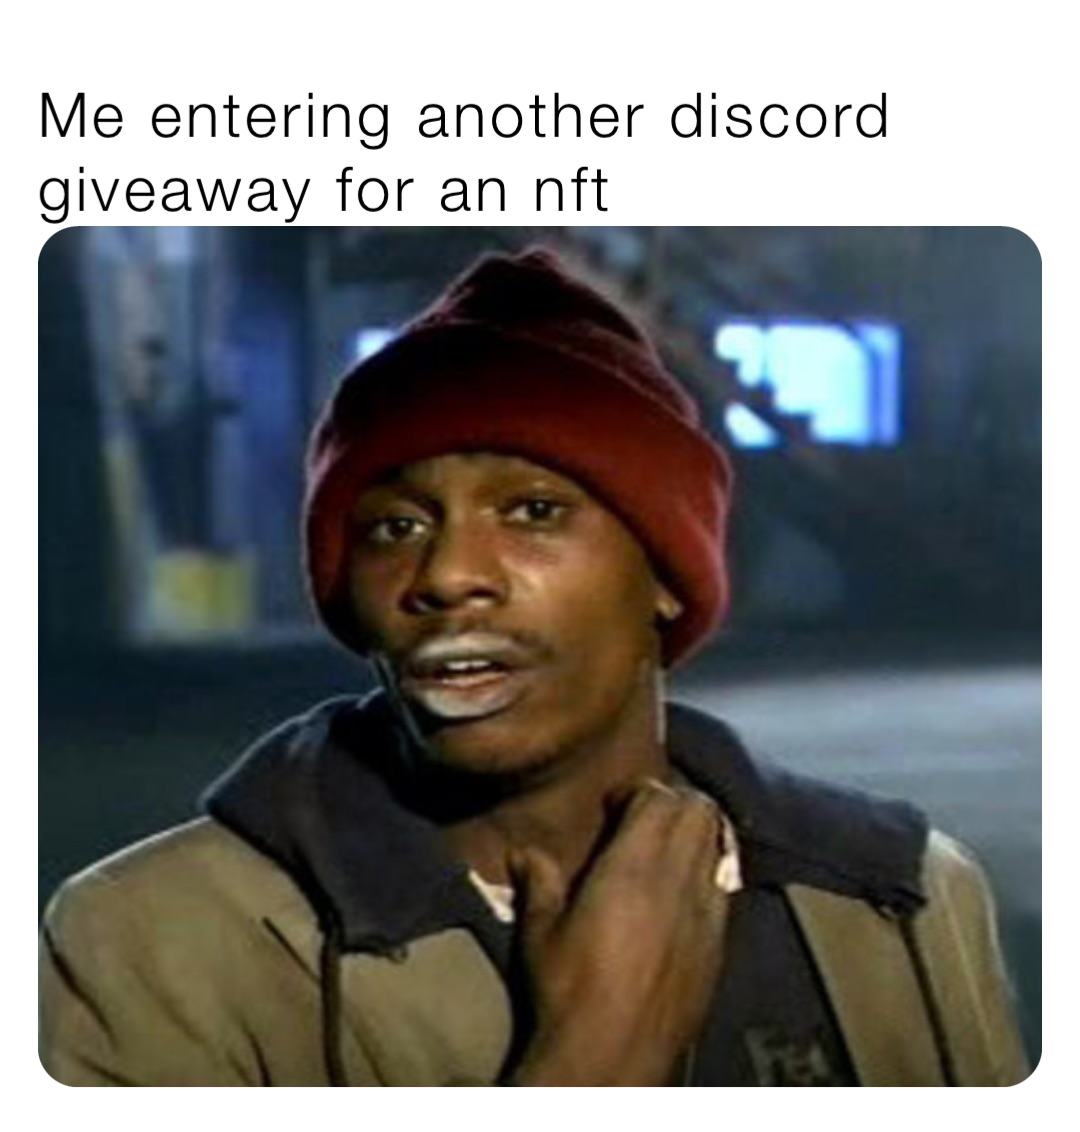 Me entering another discord giveaway for an nft